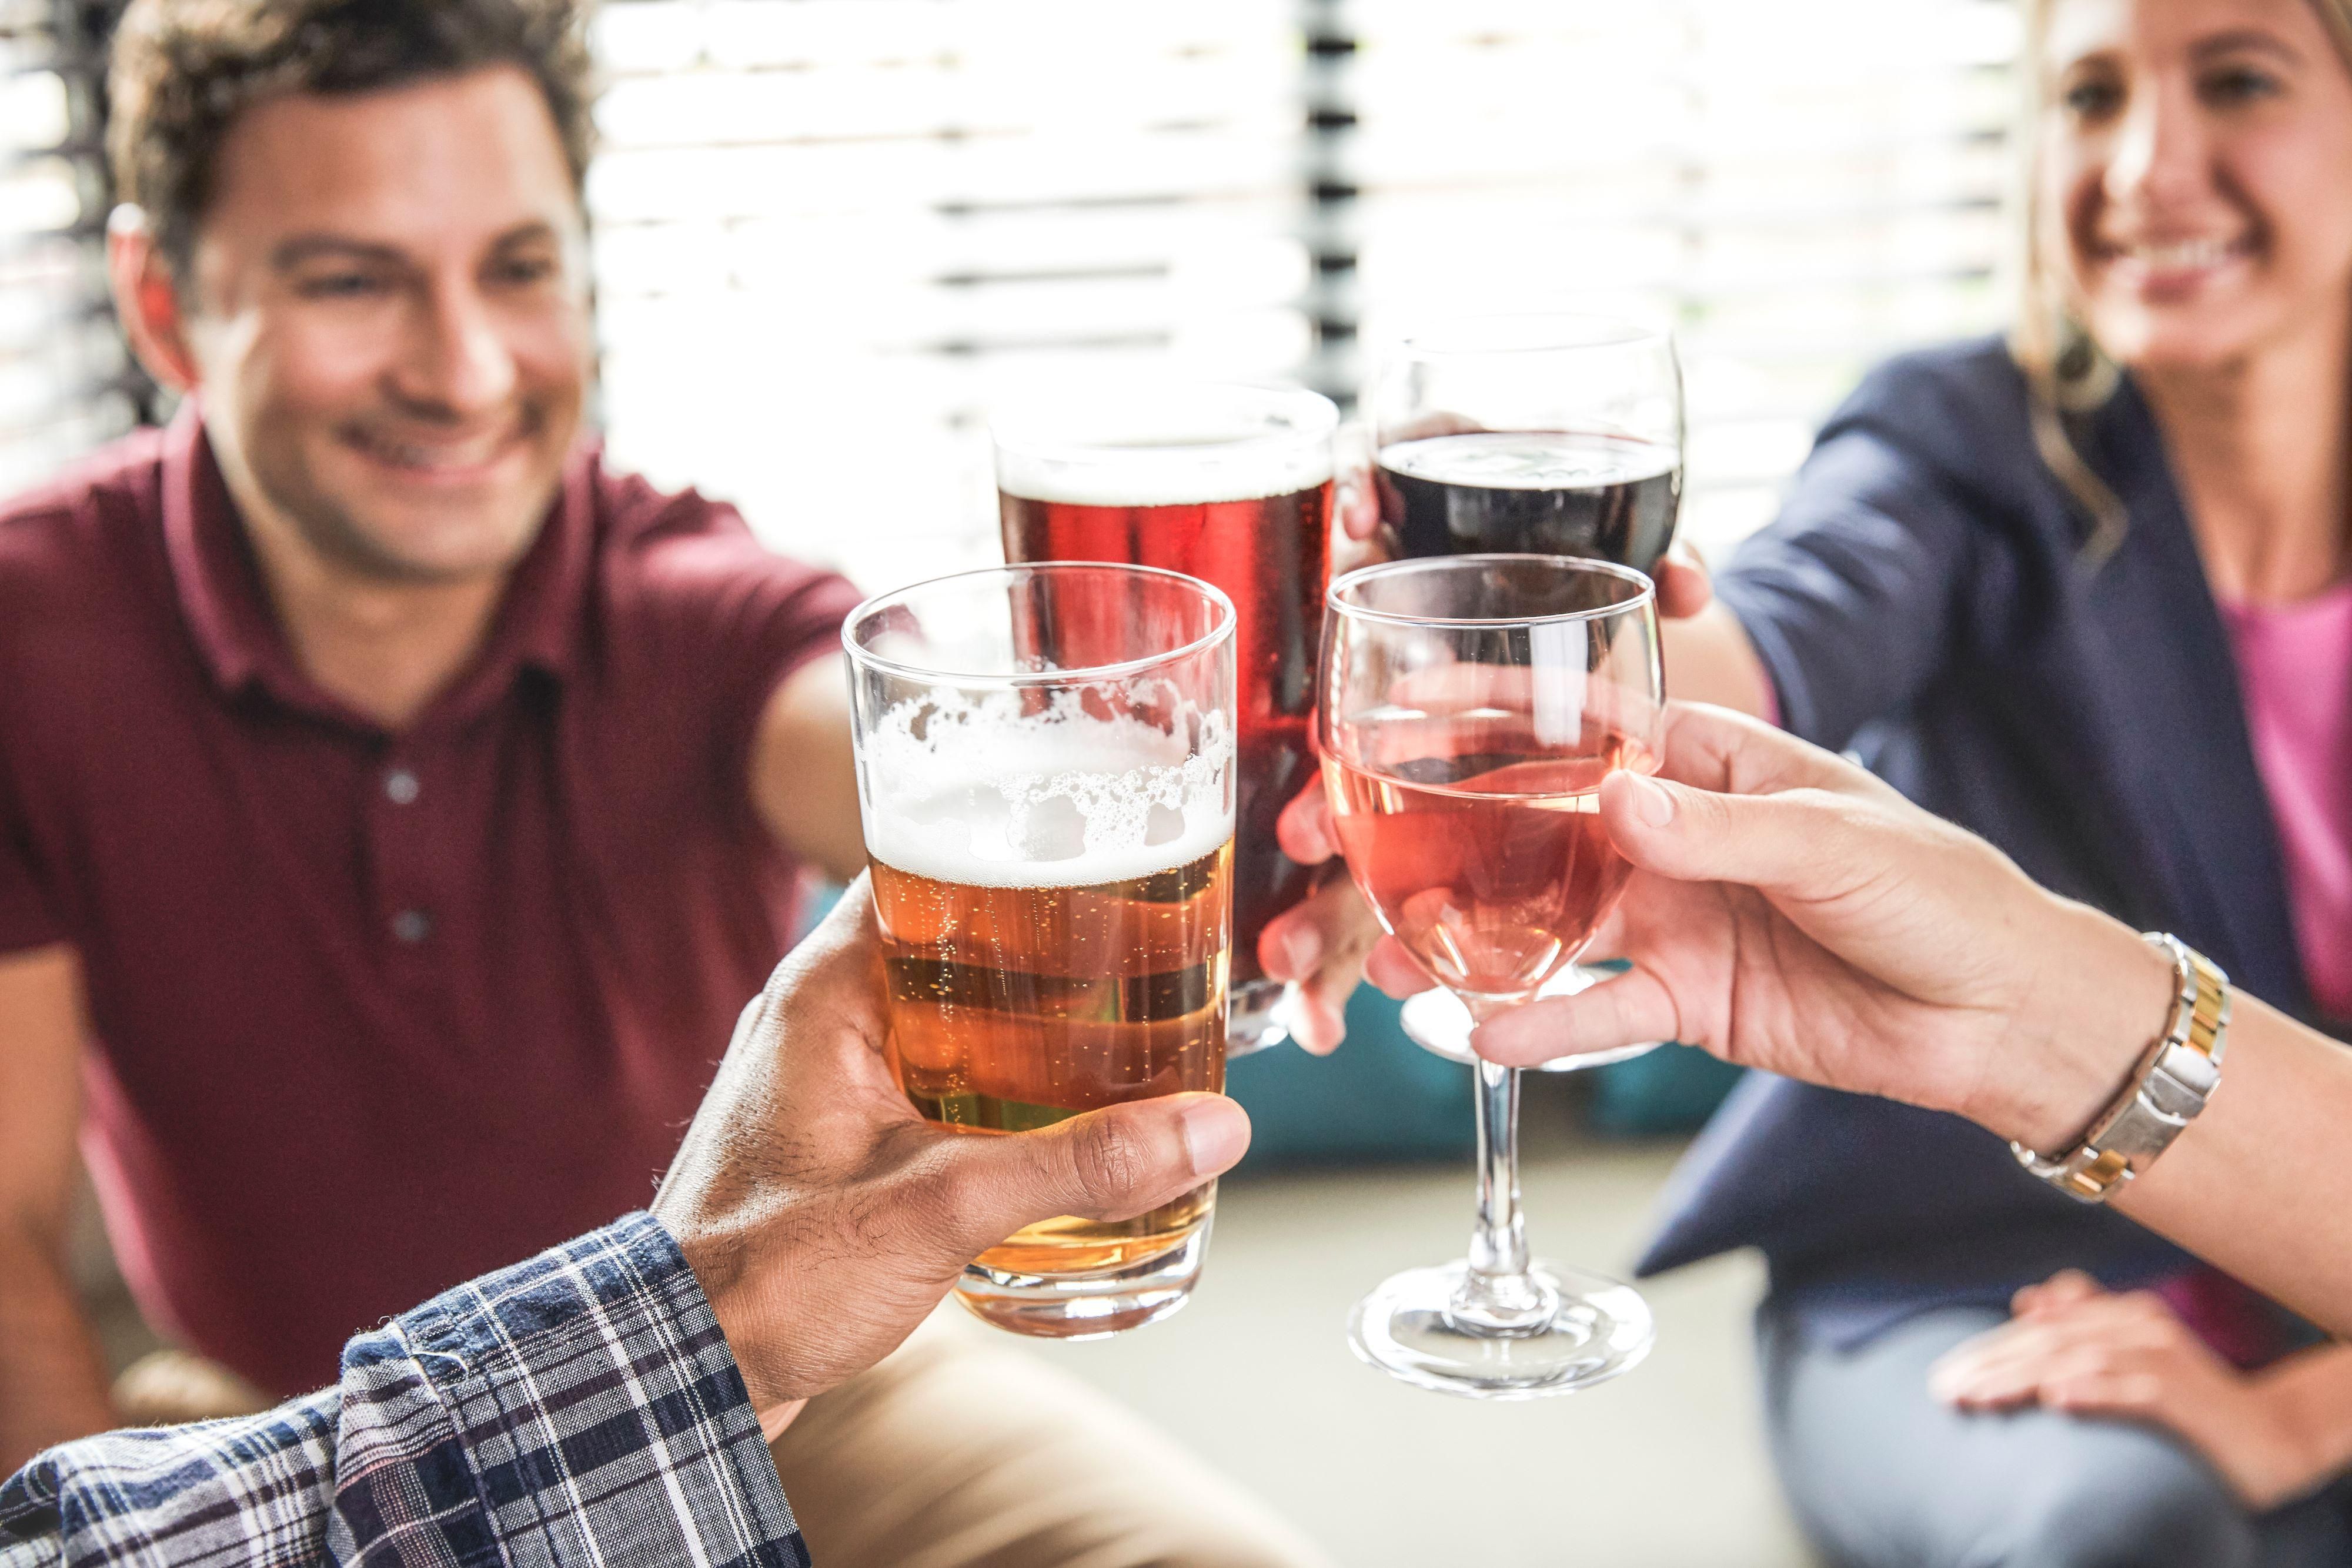 Enjoy a drink and bite on us! The Social features complimentary light bites and your choice of beer or wine on Monday, Tuesday and Wednesday nights from 5:30-7:30pm.